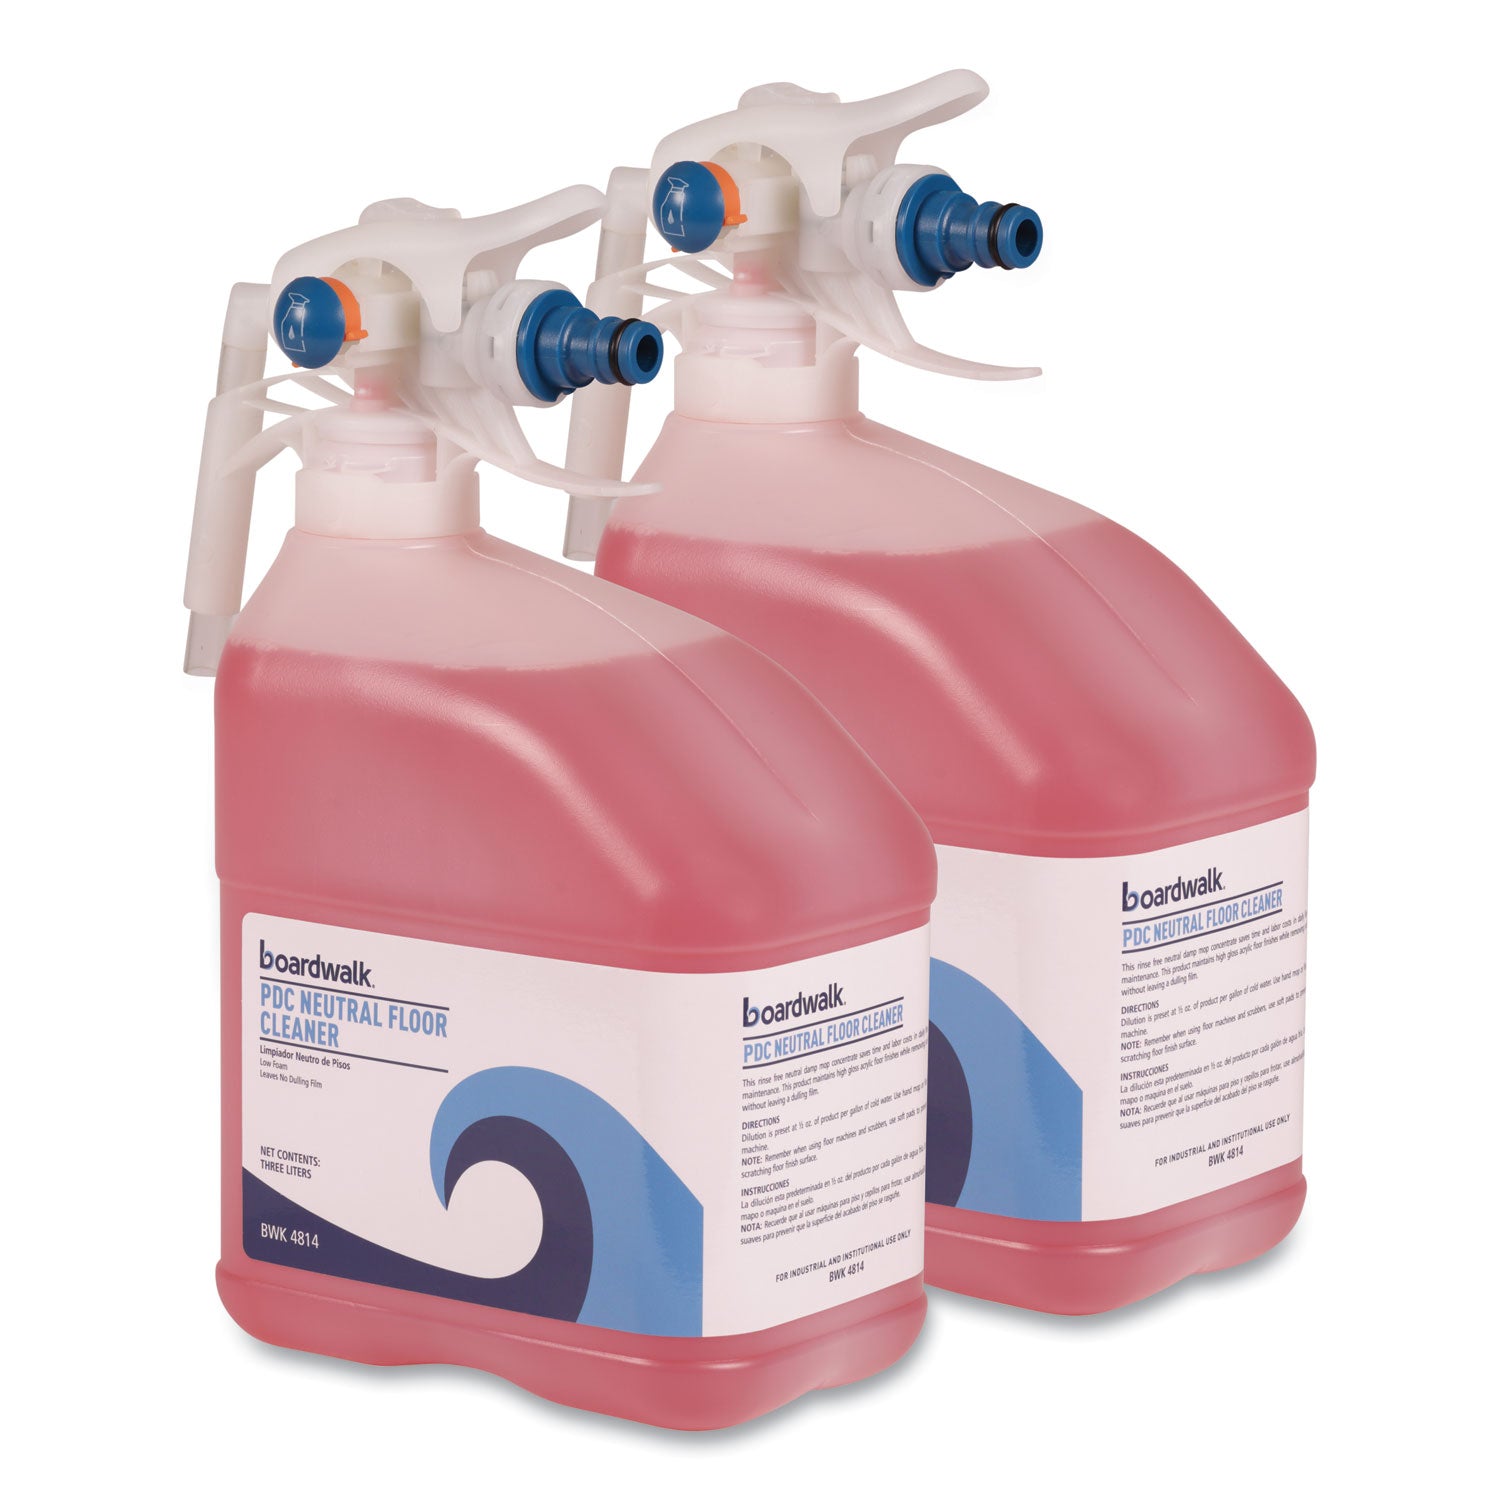 pdc-neutral-floor-cleaner-tangy-fruit-scent-3-liter-bottle-2-carton_bwk4814 - 1